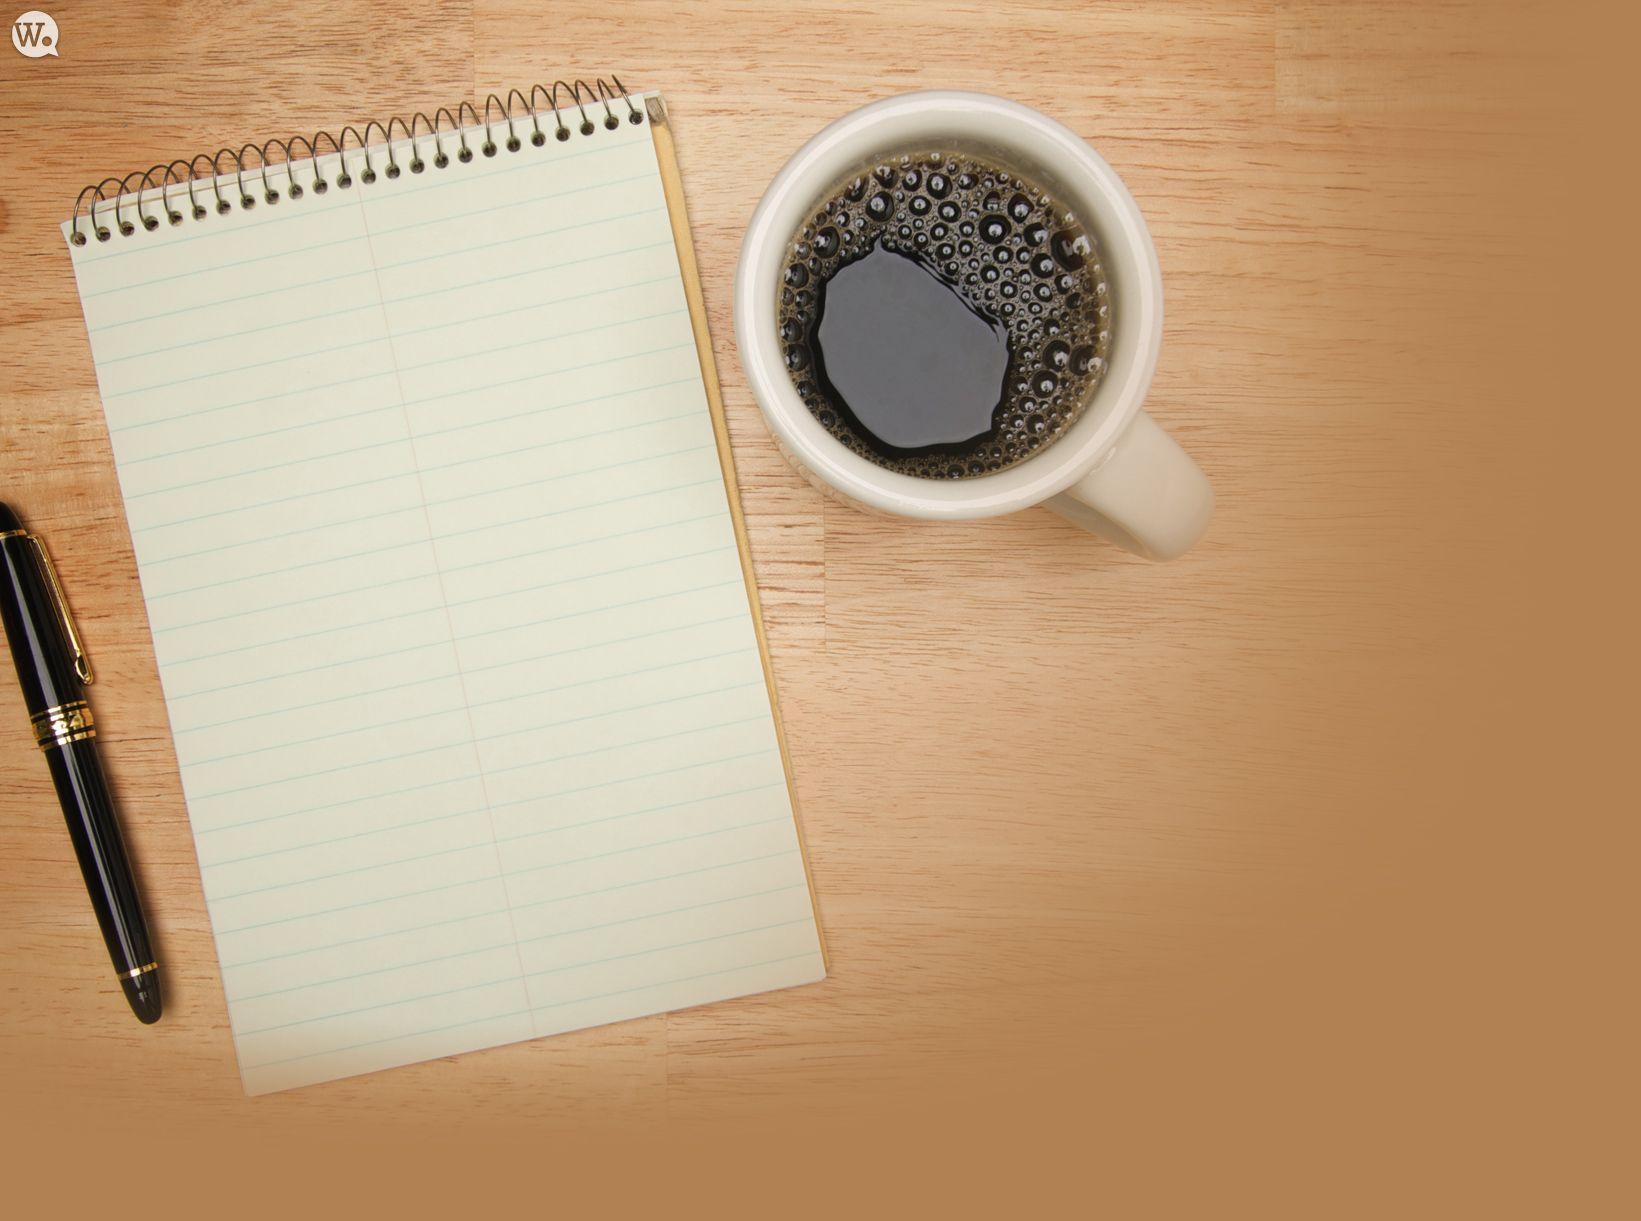 twitter background and notepad. Inspire Me!